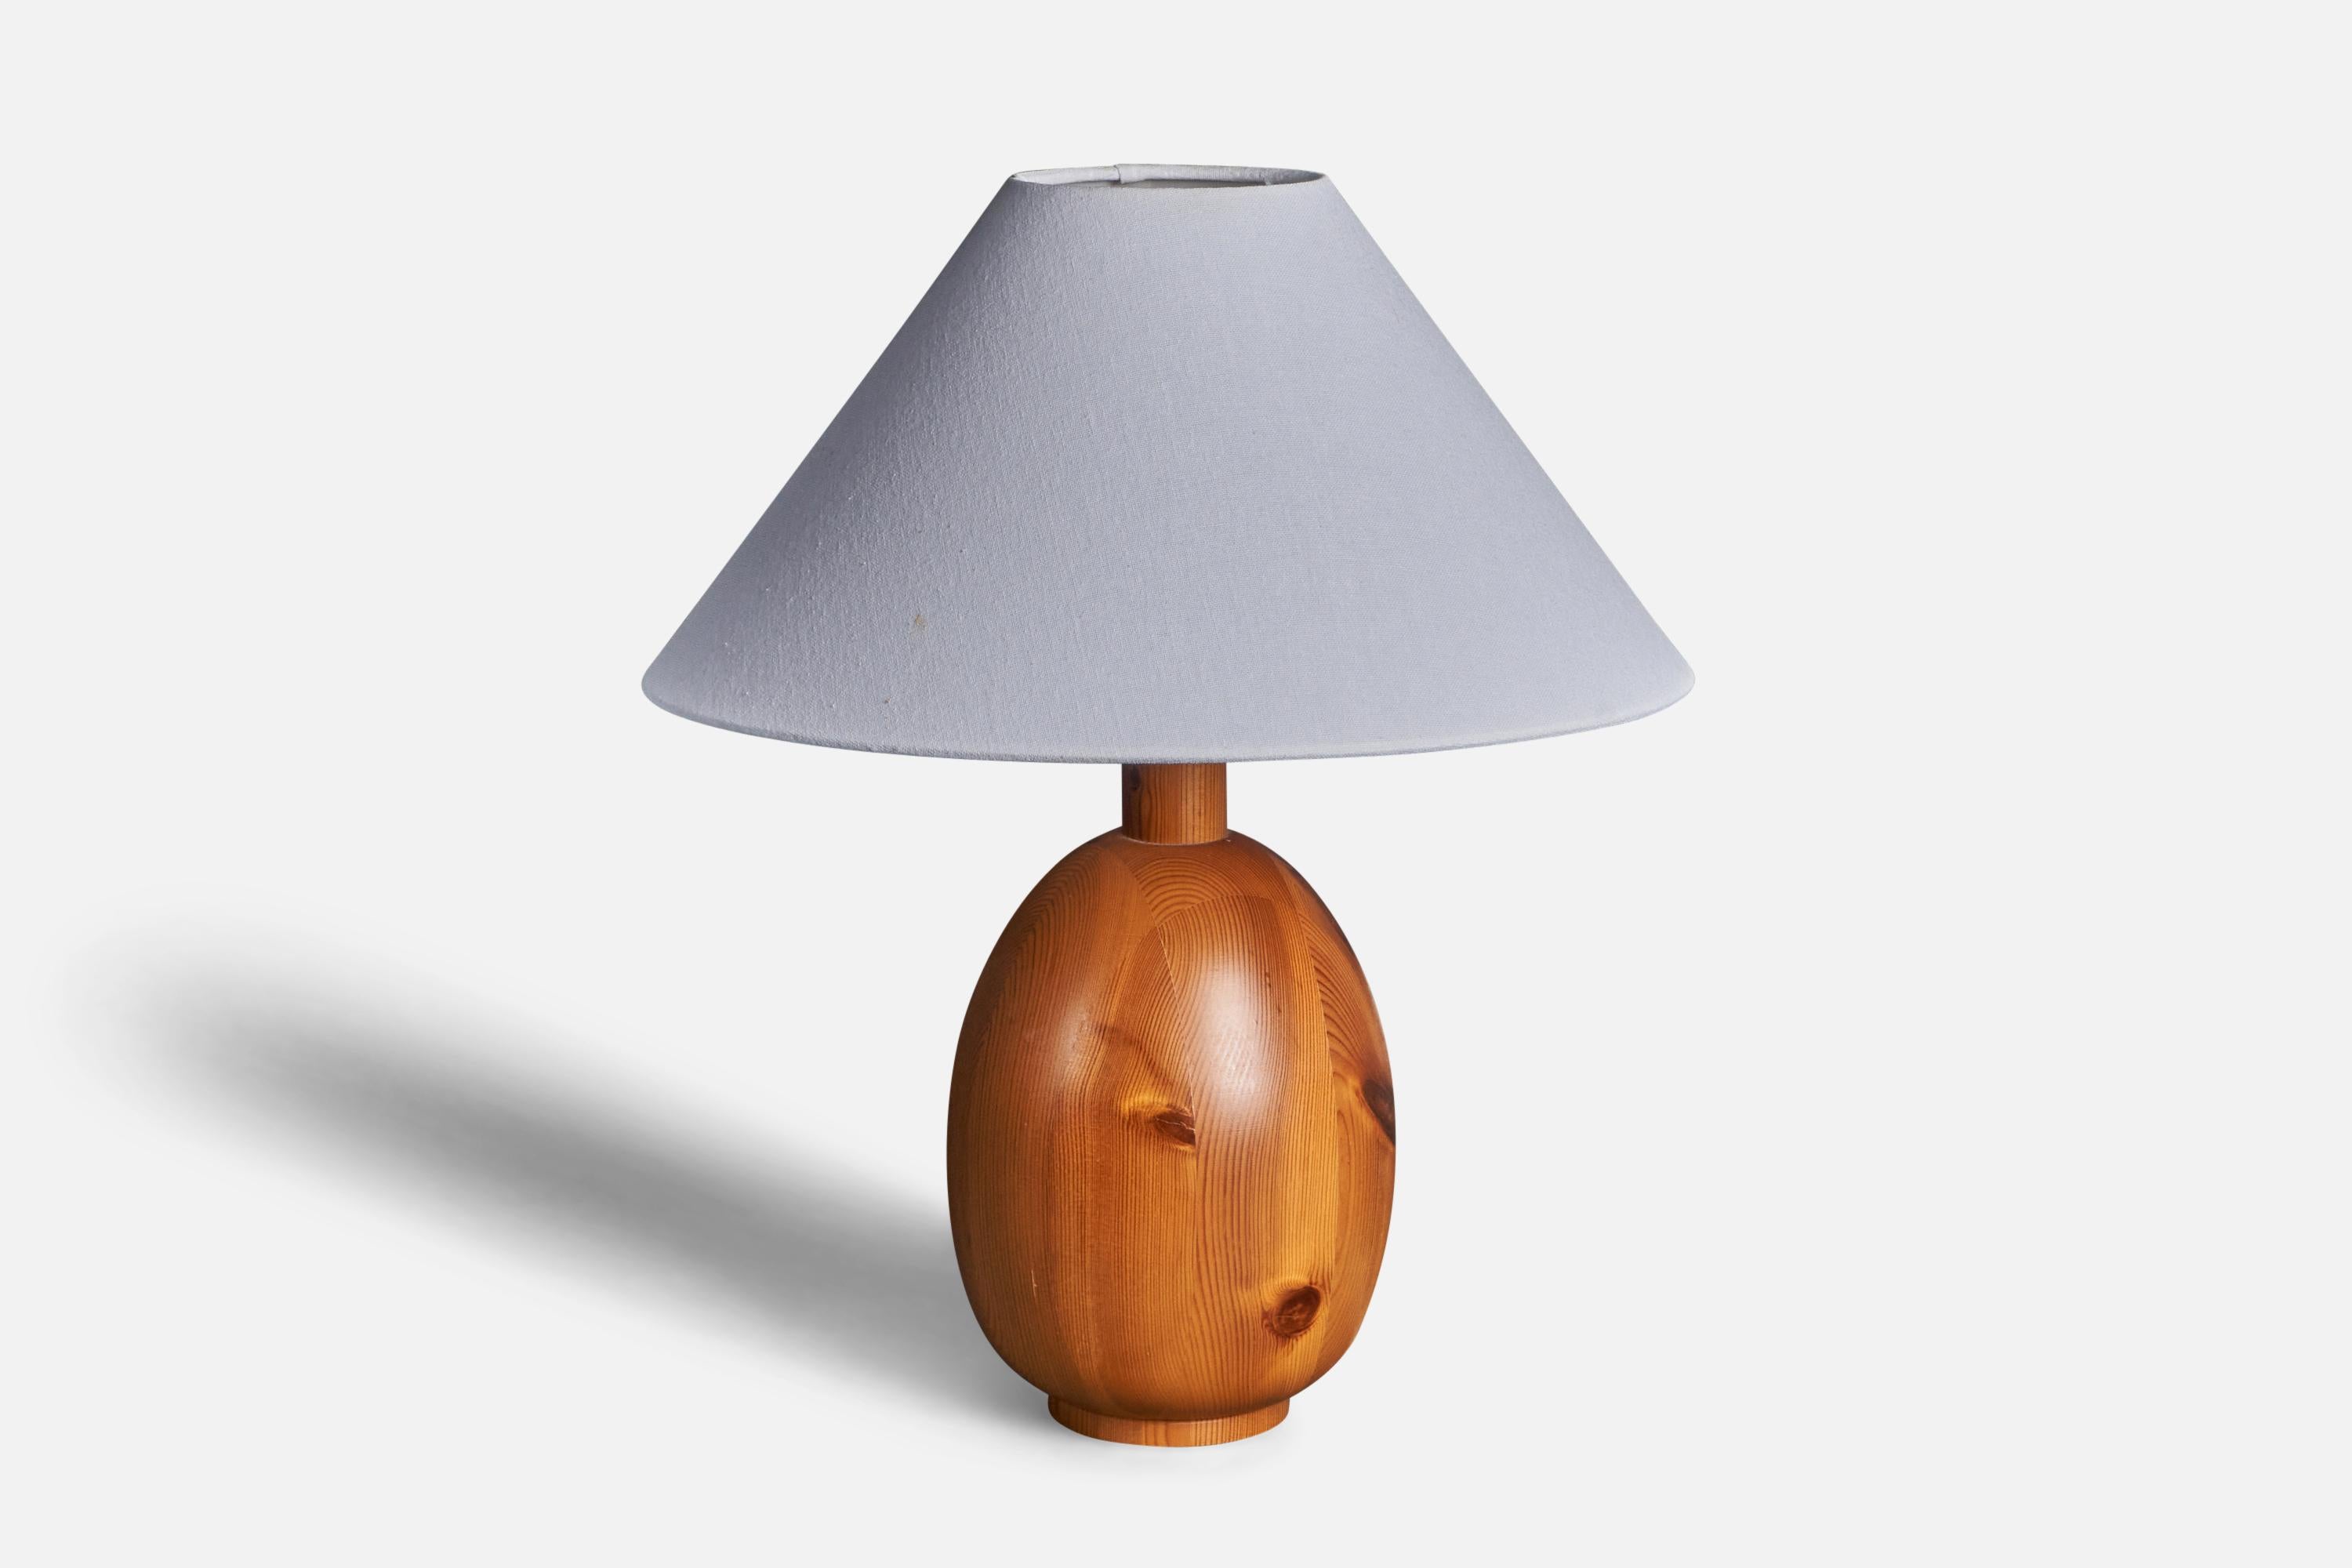 A pair of sizable table lamps. In solid pine. Lampshade not included. Produced by Markslöjd, Kinna, Sweden, c. 1970s.